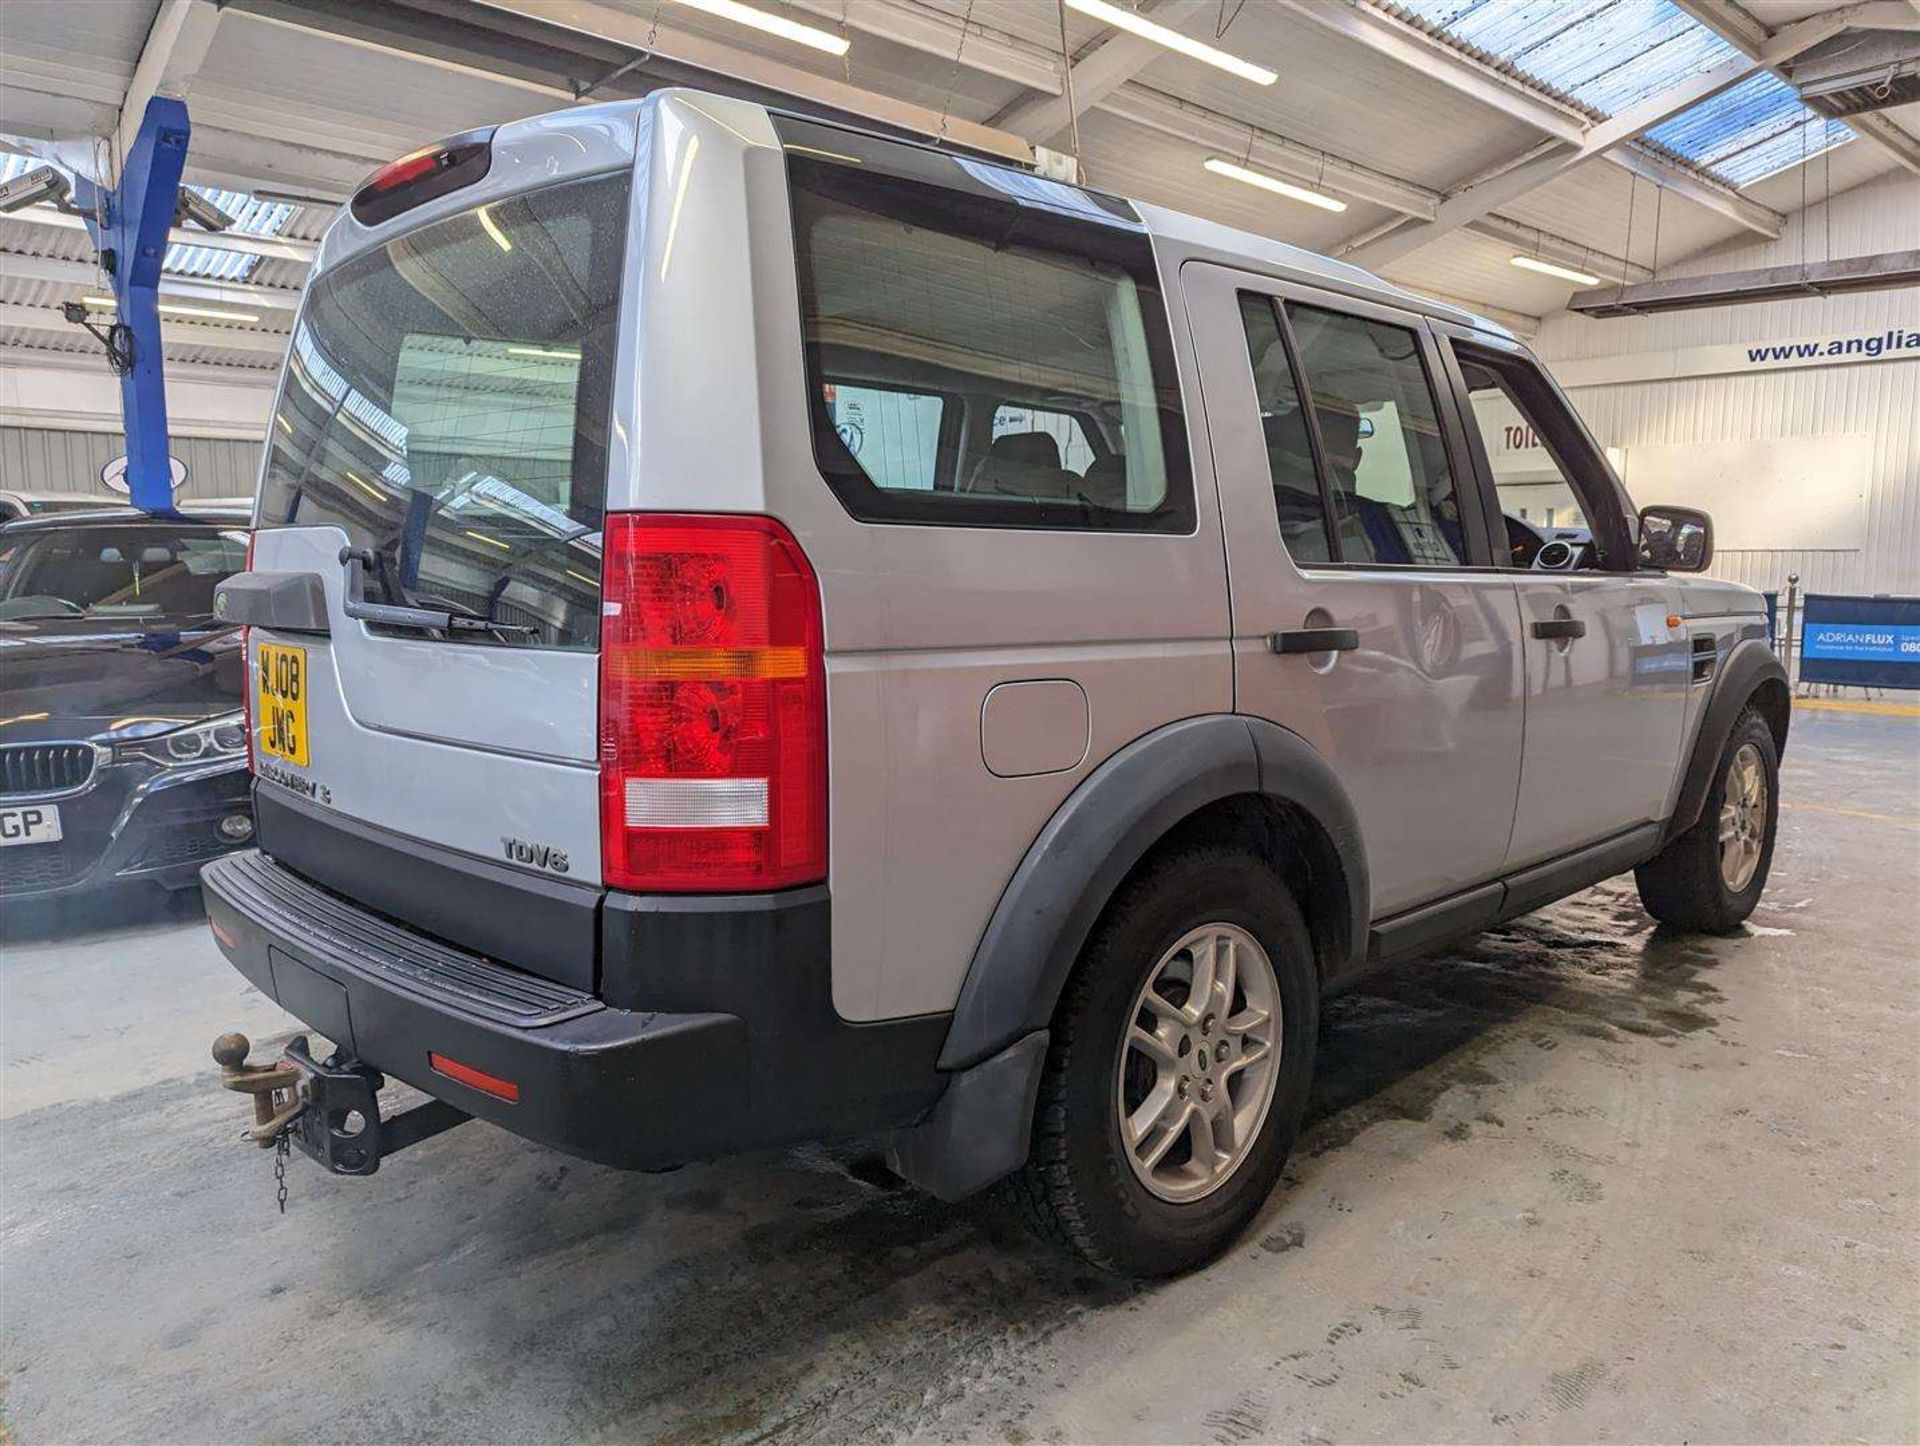 2008 LAND ROVER DISCOVERY TDV6 - Image 9 of 30